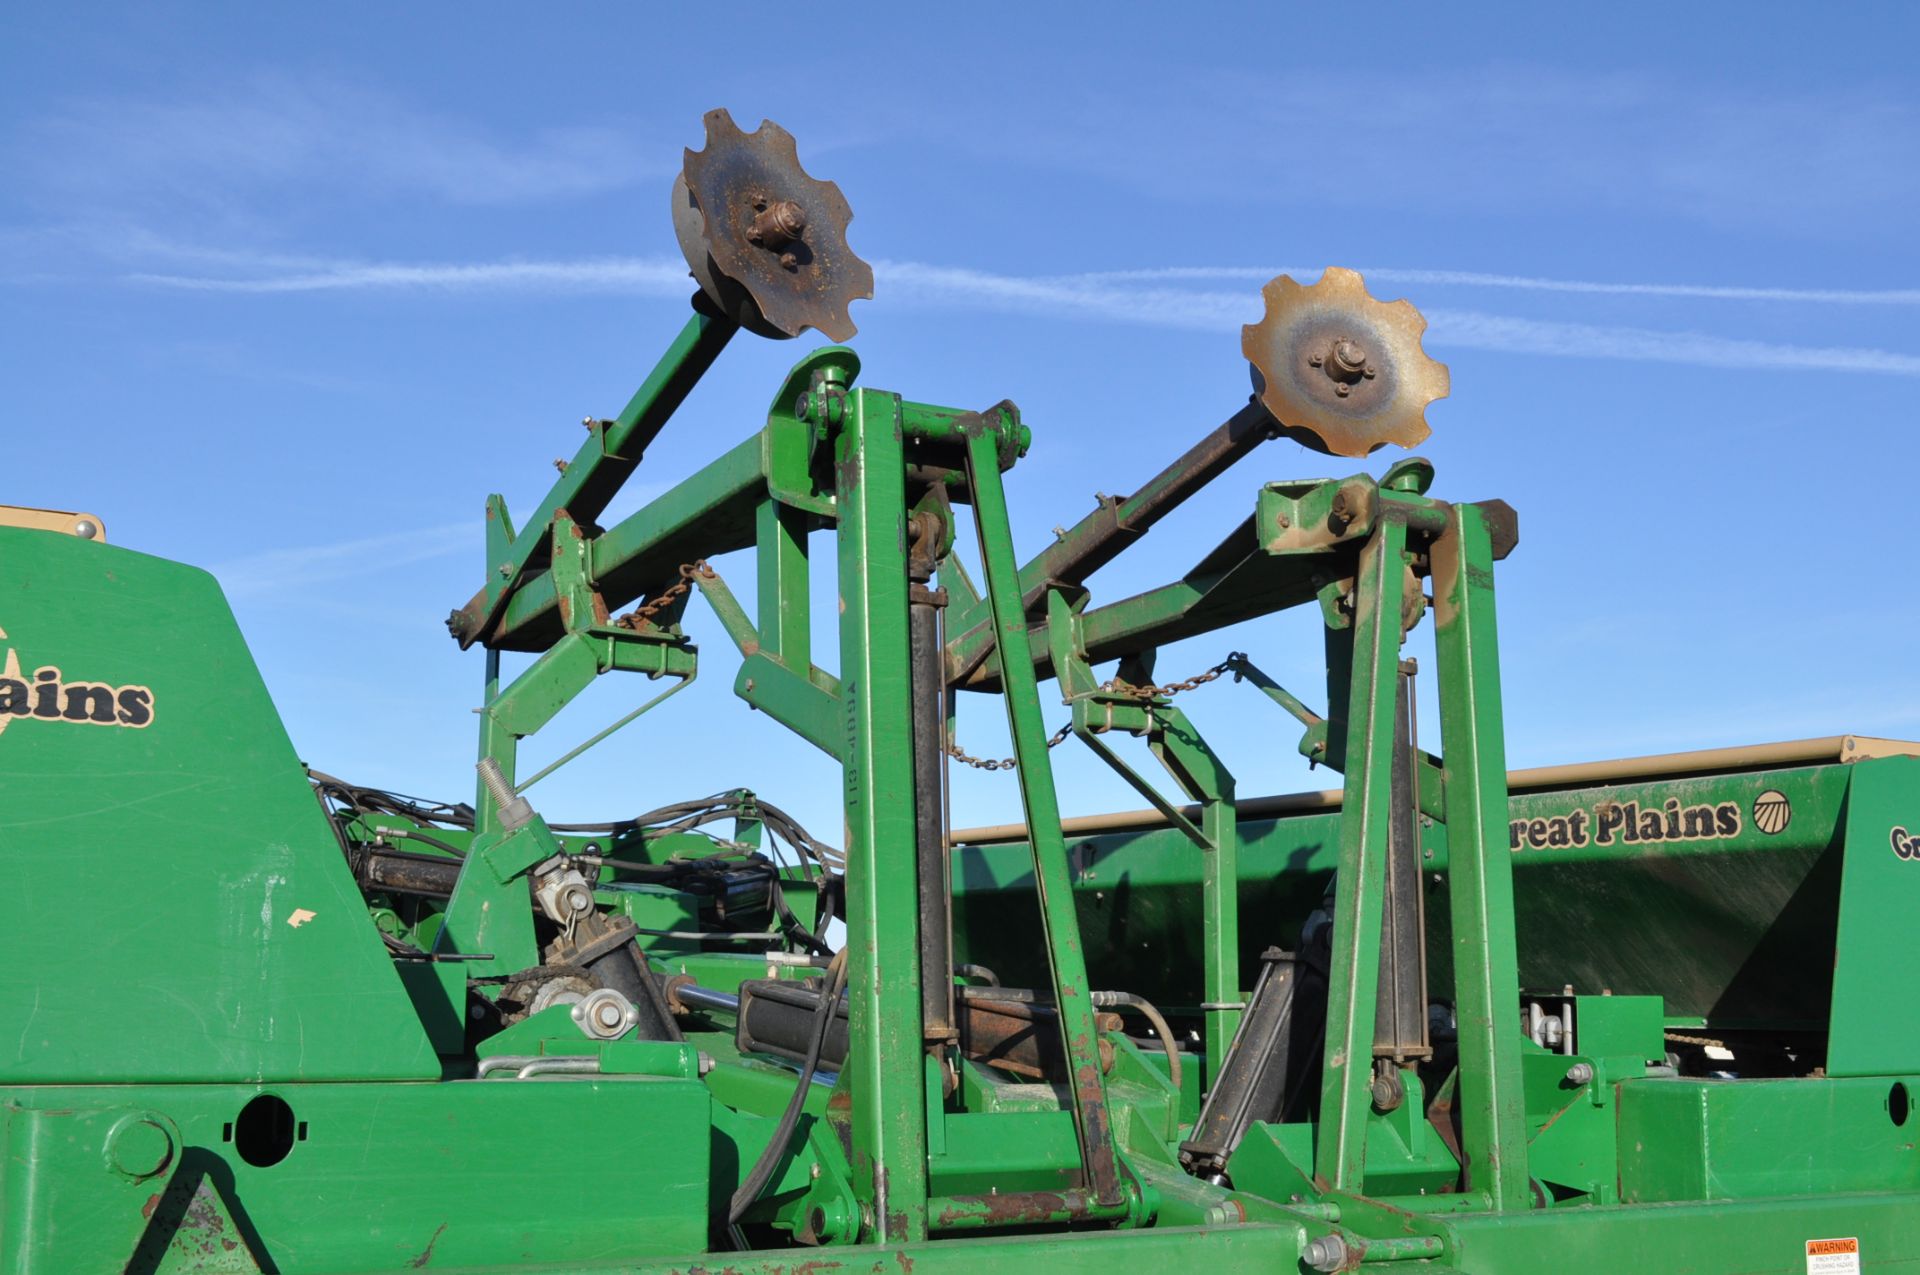 24’ Great Plains Solid Stand 2410NT drill, no-till coulters, seed loc wheel, single rubber press - Image 17 of 17